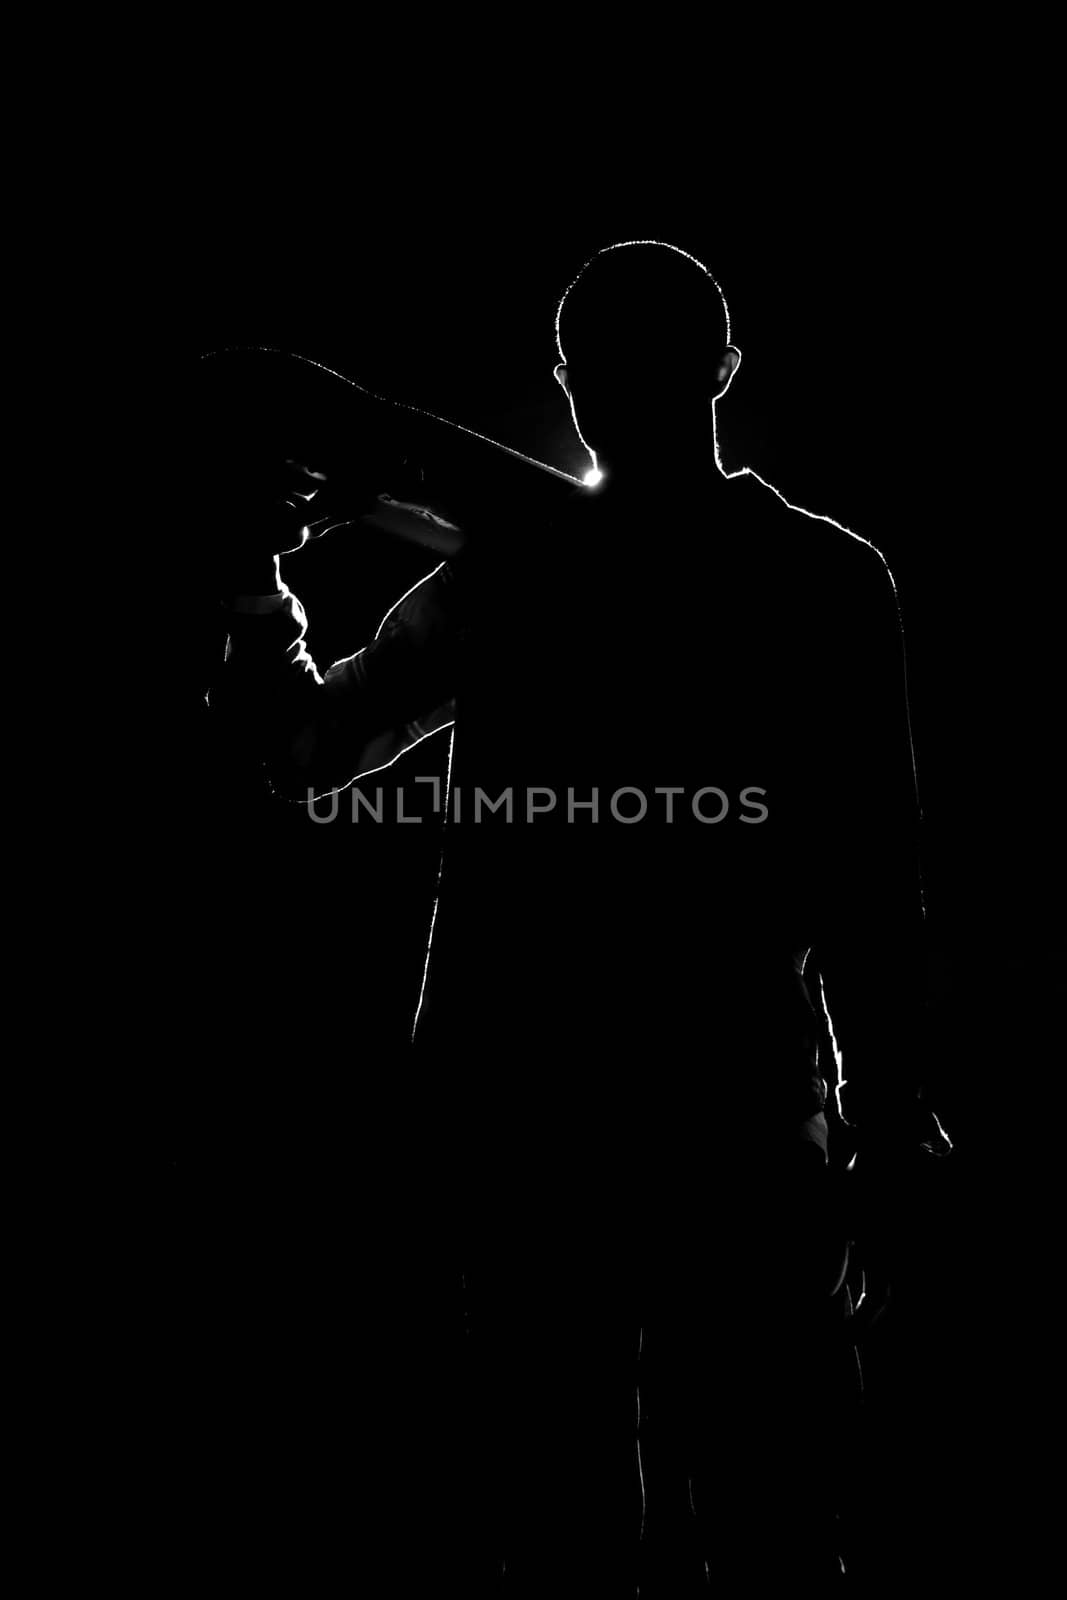 A backlit skateboarder guy posing under dramatic rear rim lighting with his skateboard in black and white.